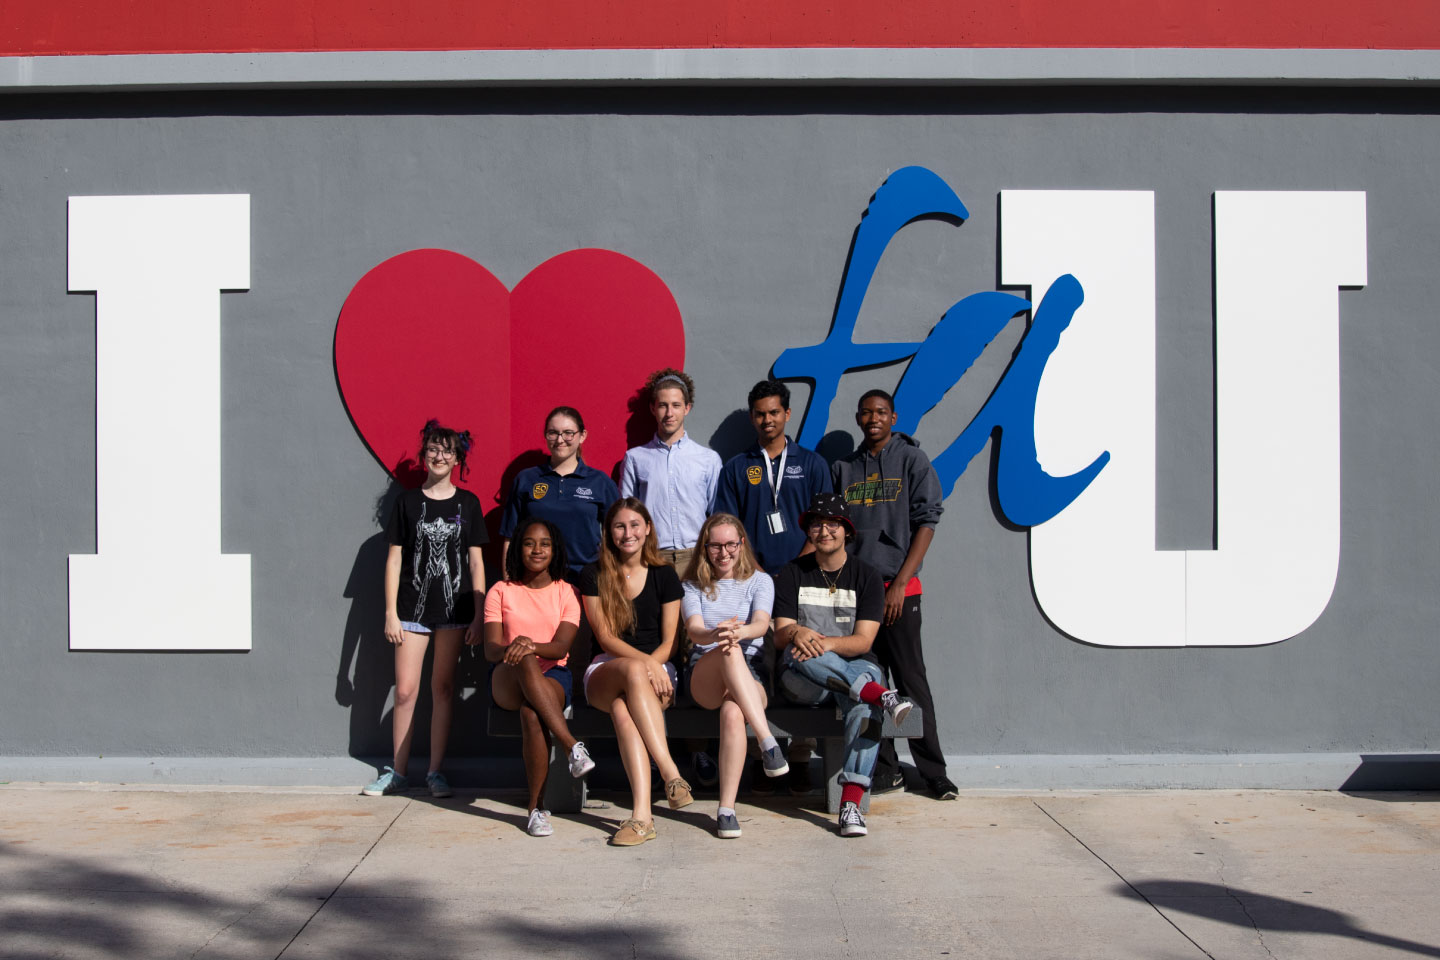 From left to right, Delaney Dobson, Noa Abiri, Eli Levit, Ajay Desai, Rudy Paul, Cydni Turner, Paige Fries, Willow Hearne and Diego Jerez. Not pictured, Joseph Michaud, Dustin Karp and Eleanor Stuart.